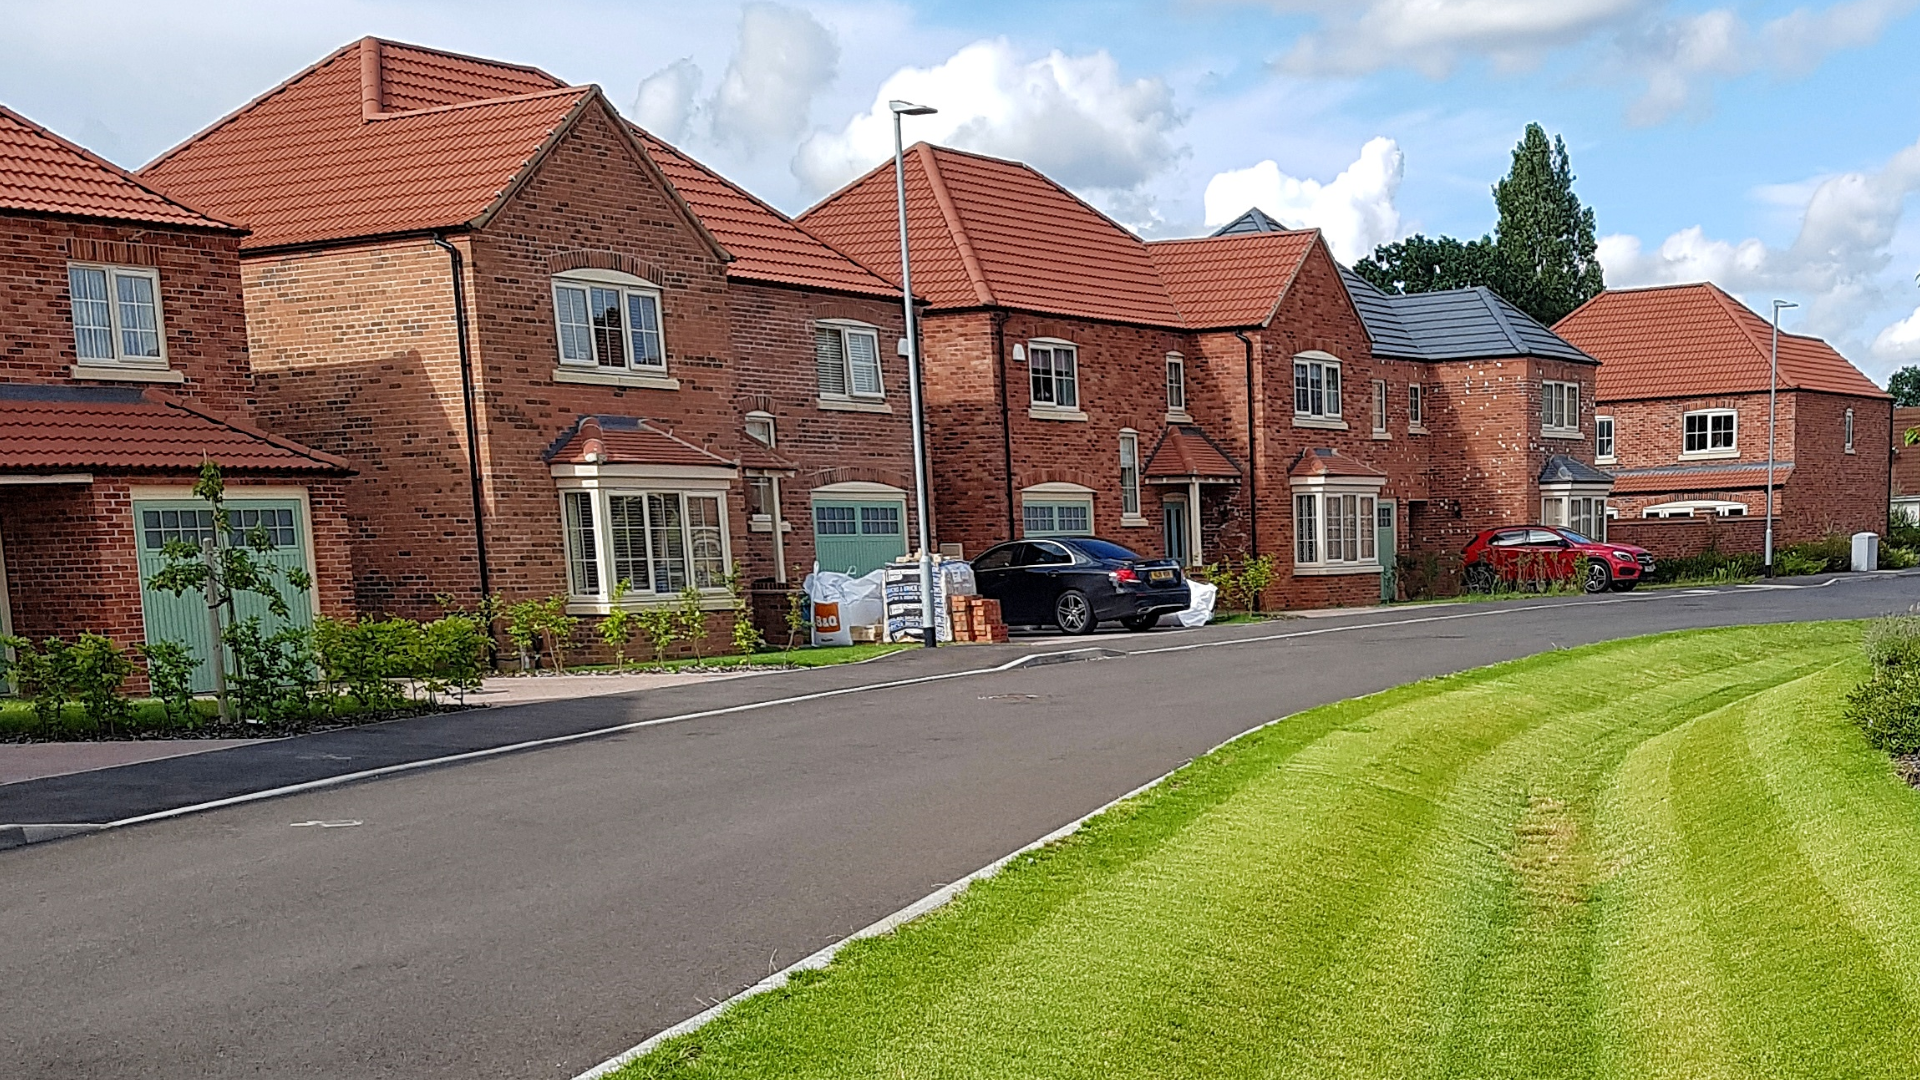 A row of houses in a development in Lincolnshire.